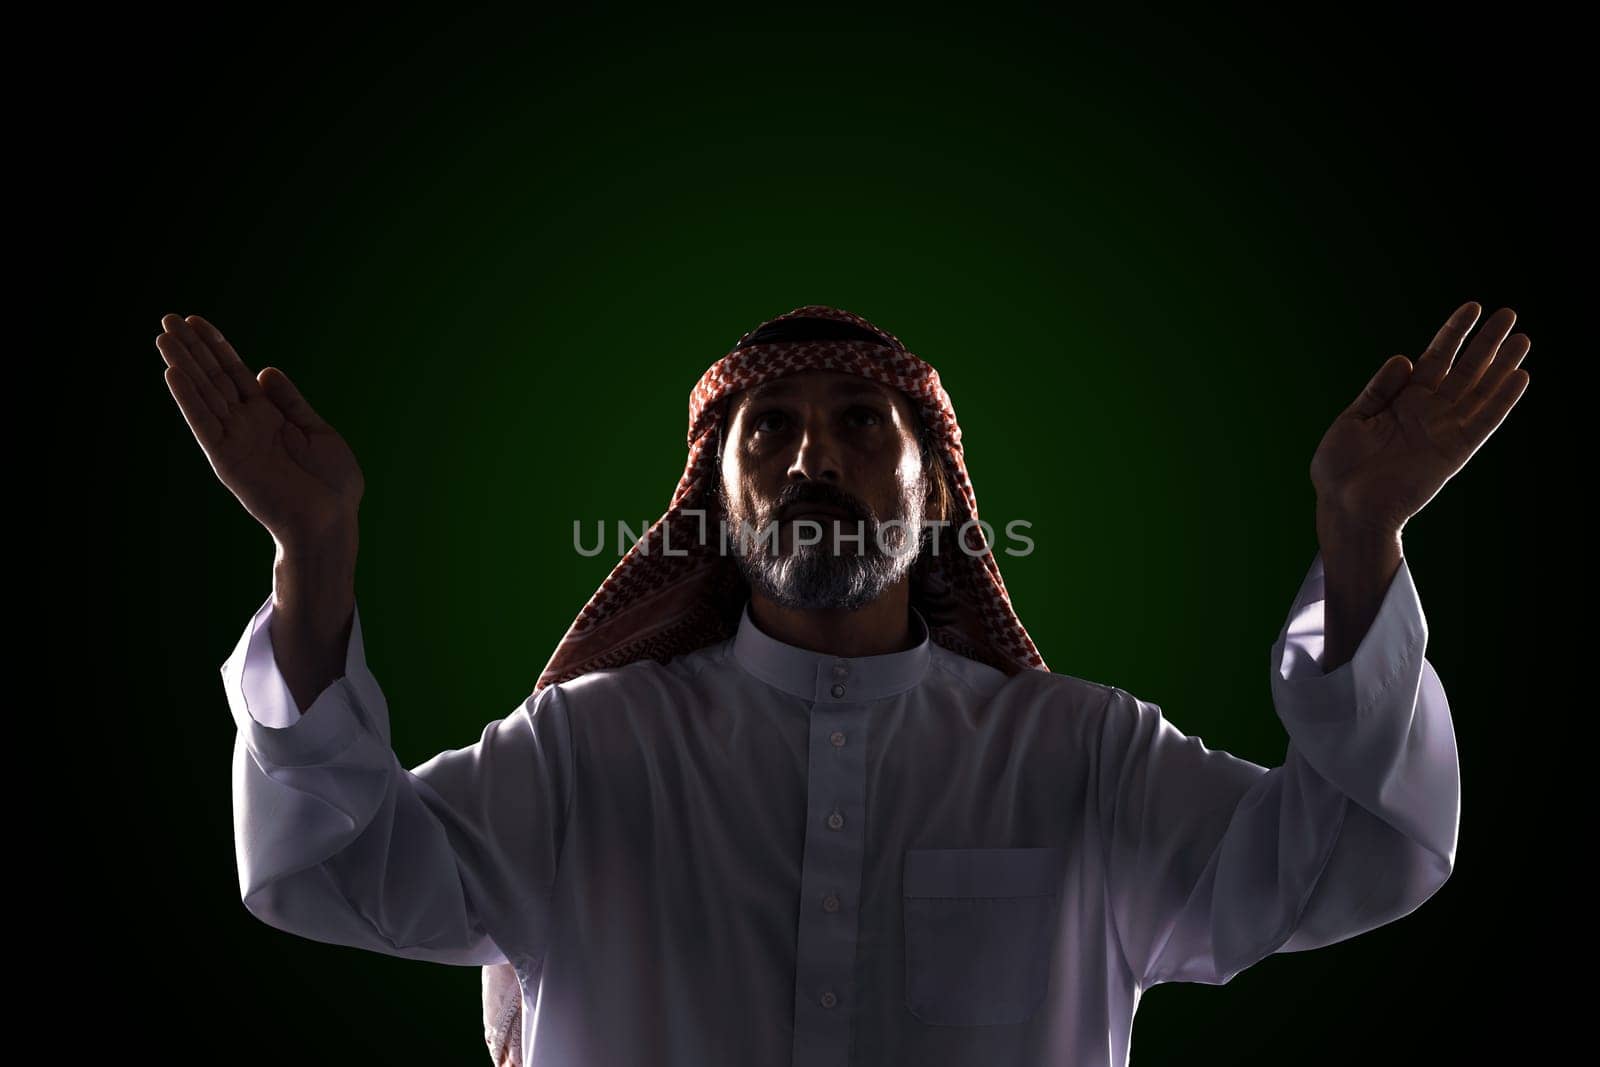 Muslim man raises his hands to sky in prayer and praise, expressing his devotion and faith in One God of Allah. Spirituality and traditional practices of Islamic culture and religion.